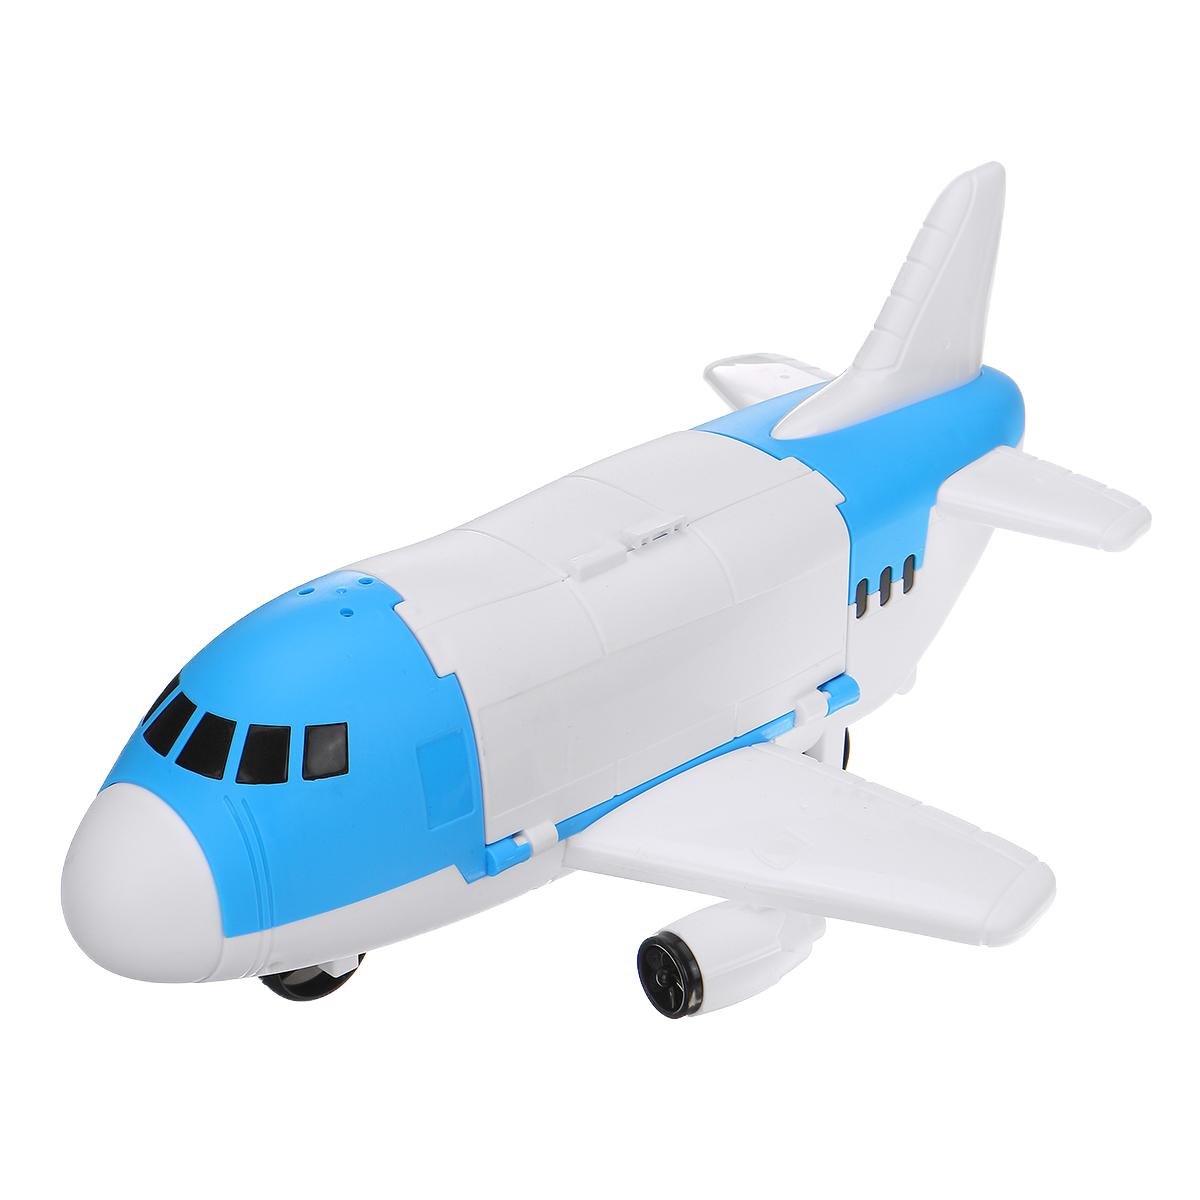 Storage-Transport-Aircraft-Model-Inertia-Diecast-Model-Car-Set-Toy-for-Childrens-Gift-1621631-5